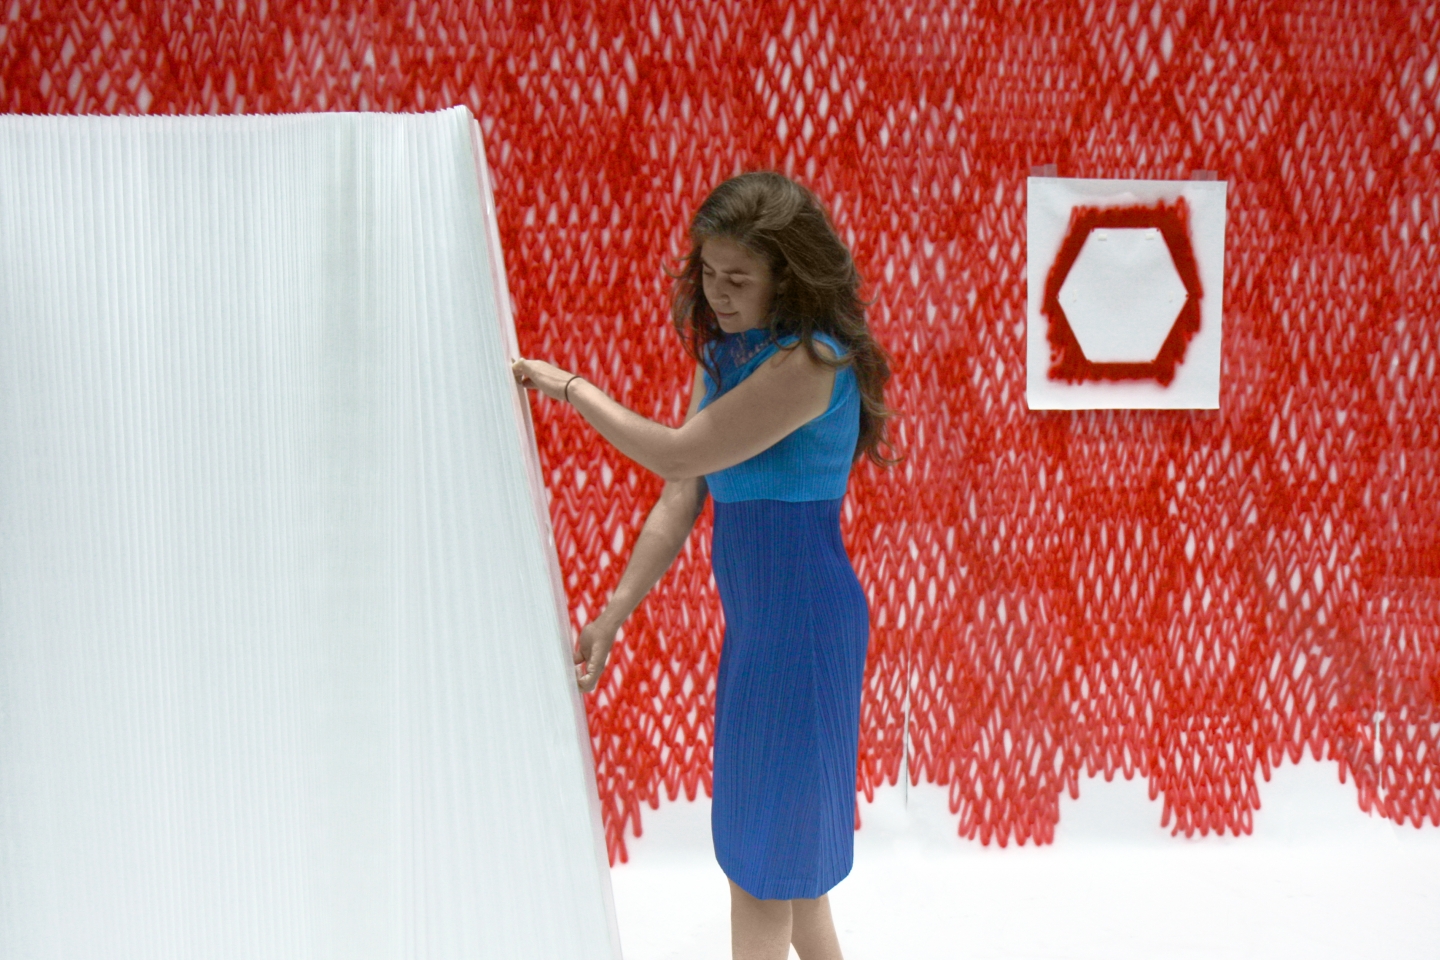 Sasaki heartbeat softwall installation at Dwell on Design in Los Angeles